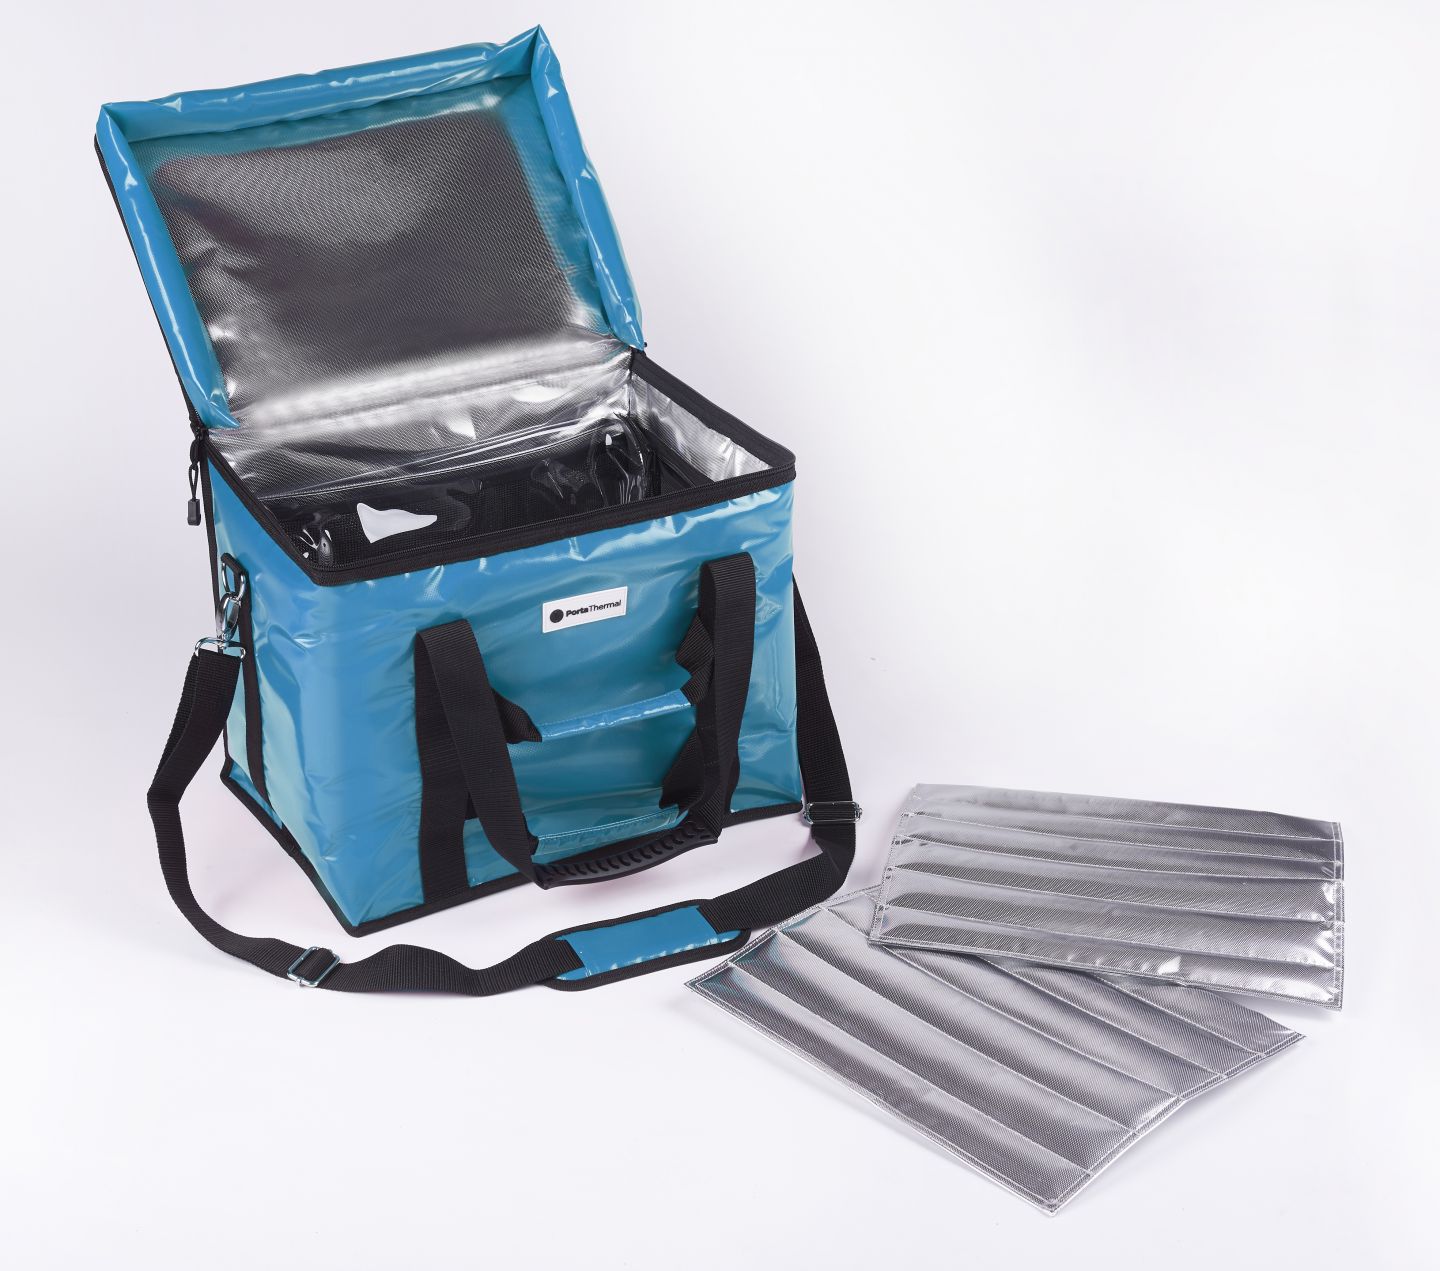 Buy Skybound 800 ml Blue HDPE Vaccine Carrier with 2 Ice Packs M4-9F2L-VPY3  Online in India at Best Prices